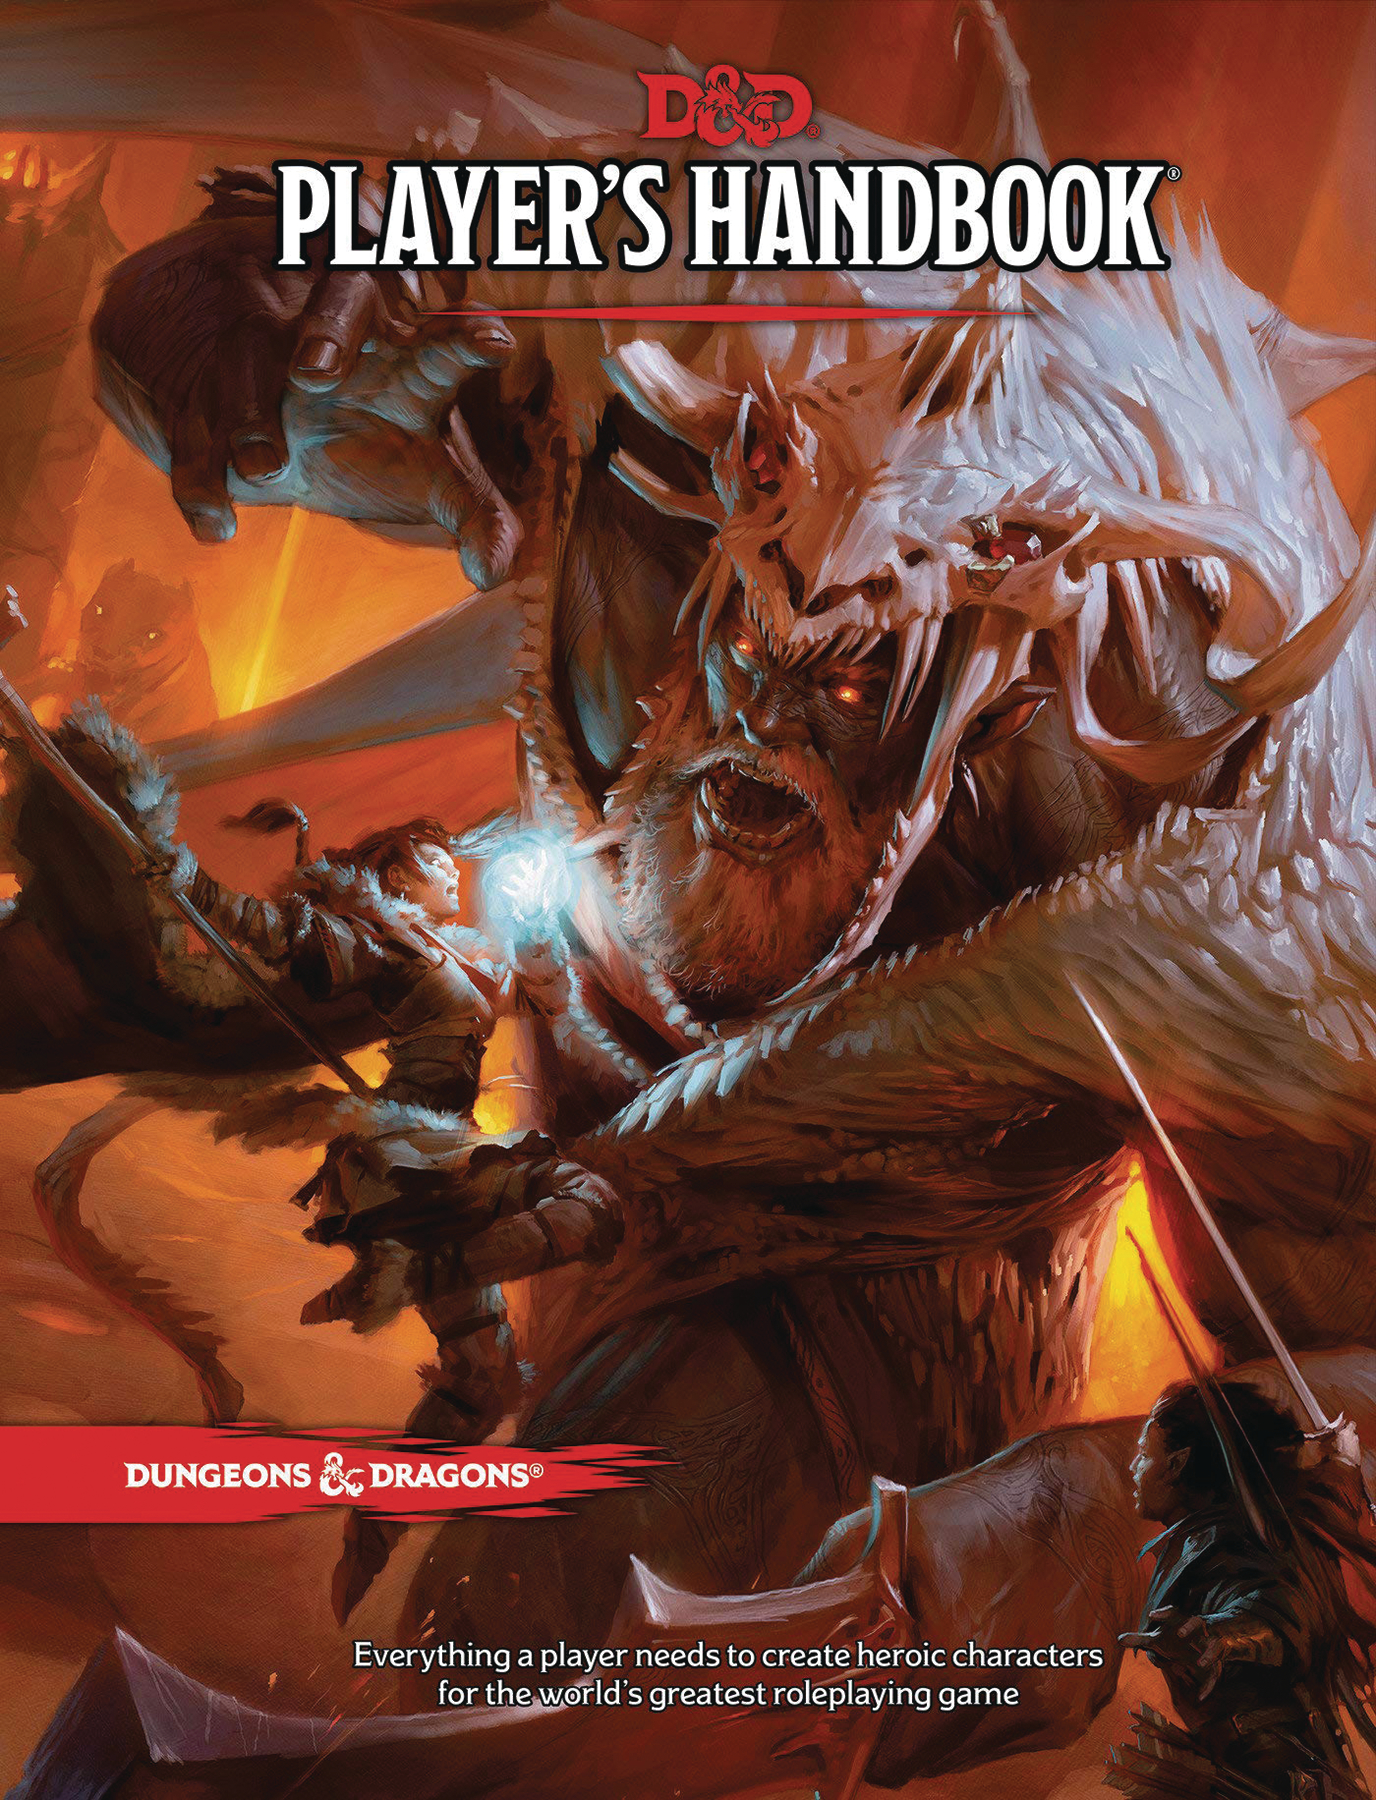 Dungeons & Dragons 5th Edition - Players Handbook Hardcover